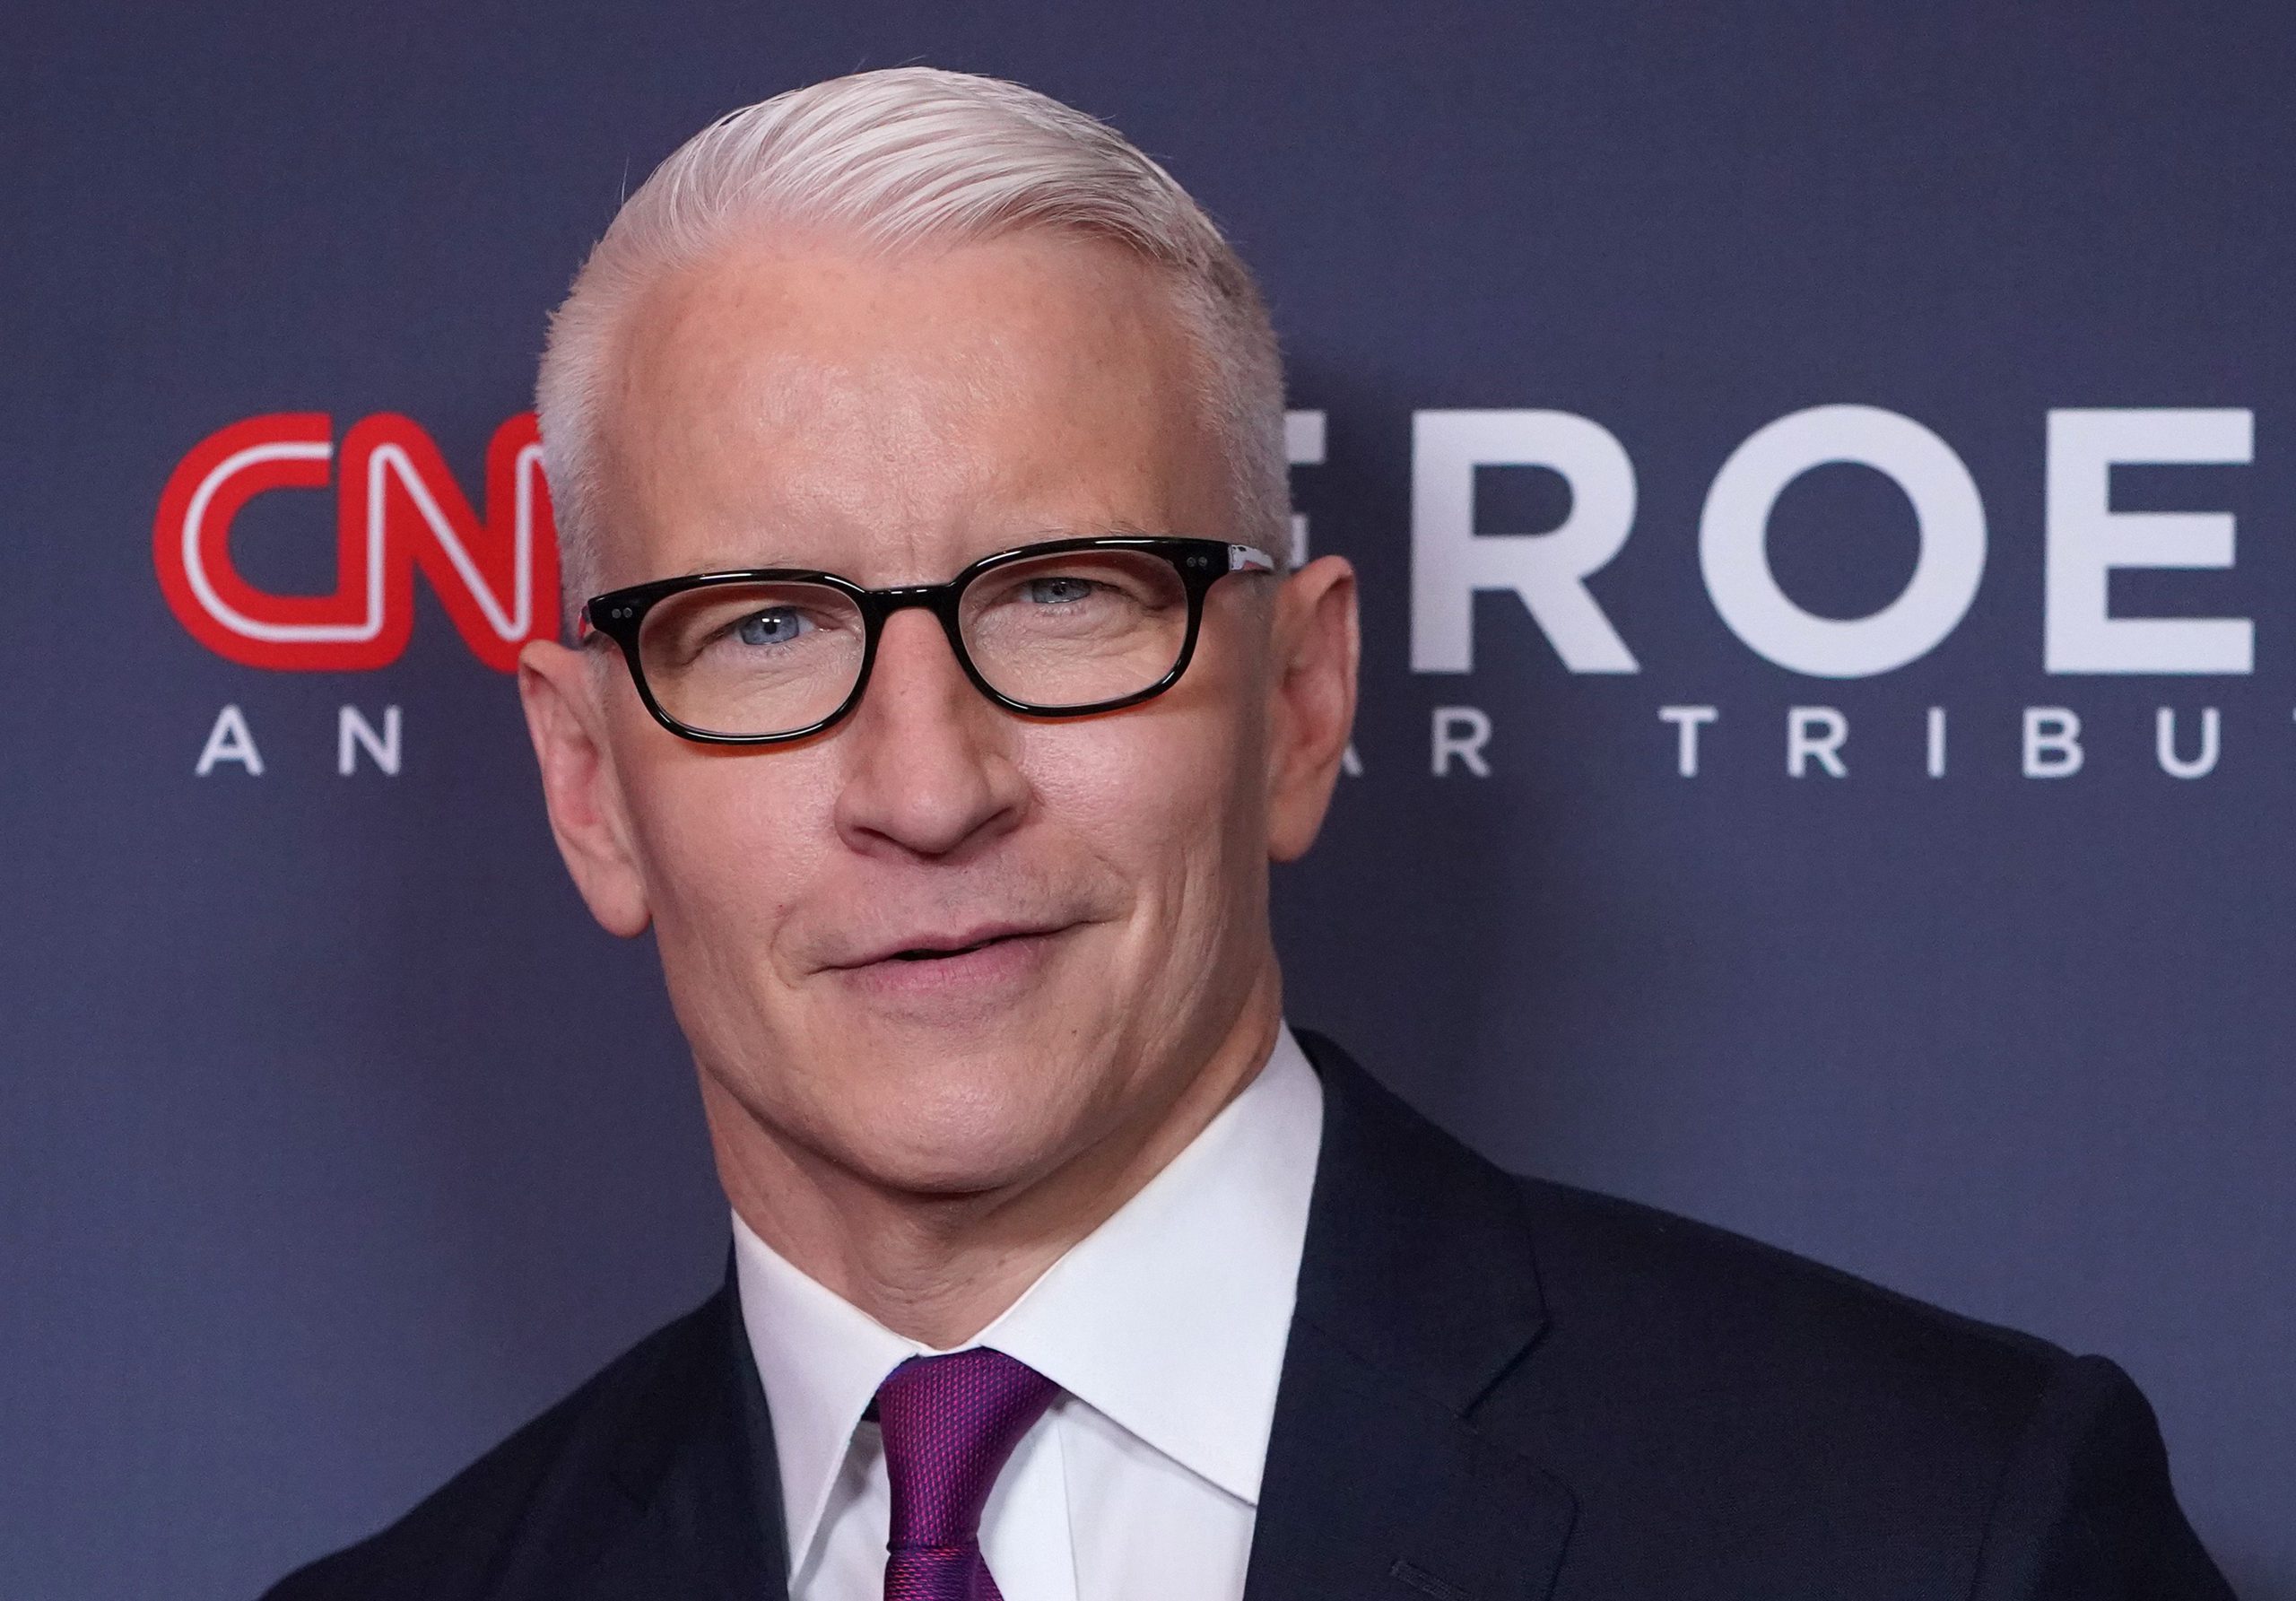 Who is Anderson Cooper dating? Friends are hoping it to be old-friend and co-star